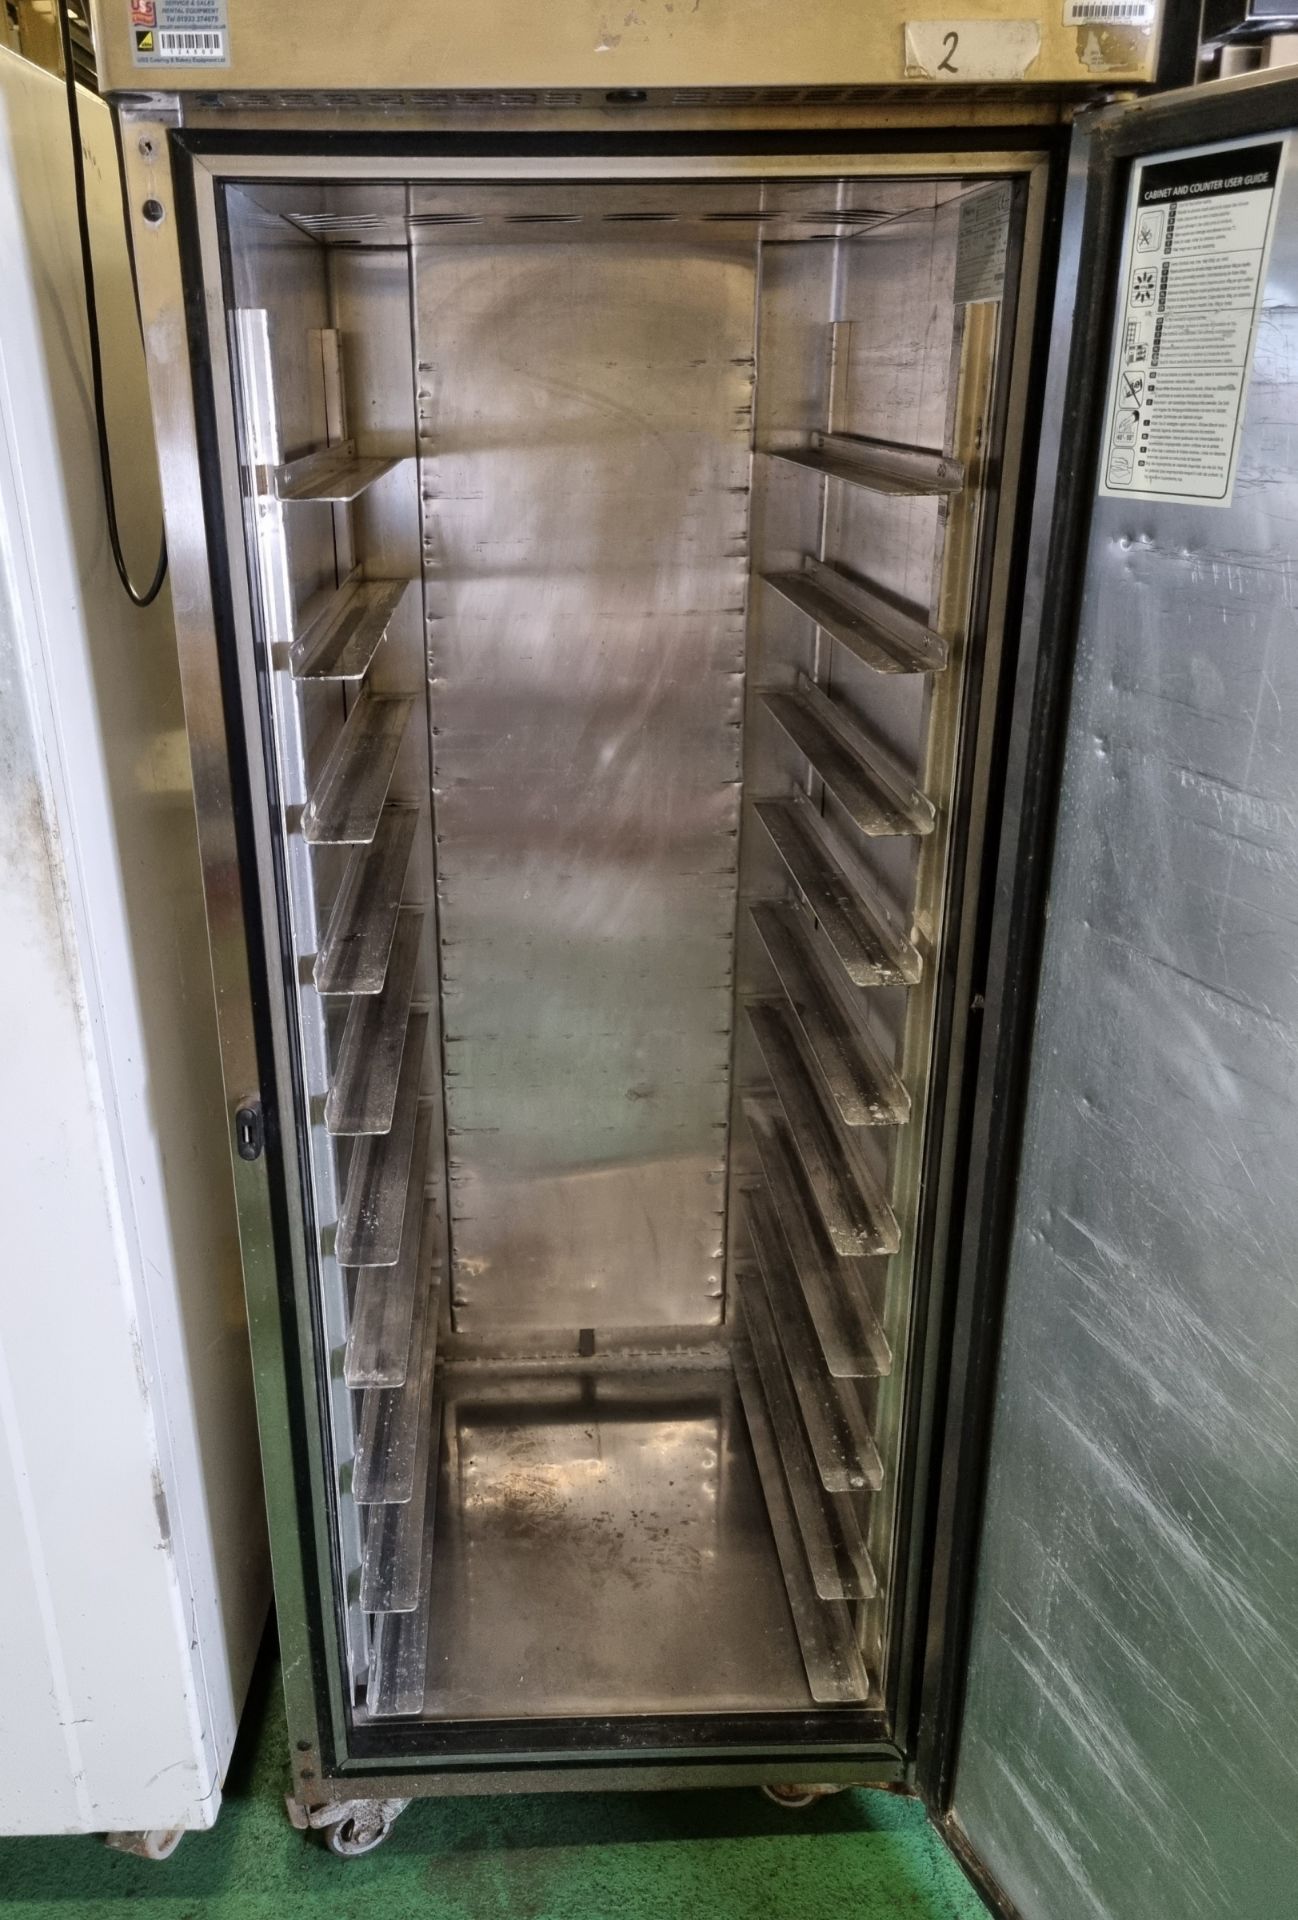 Foster EPROG600L stainless steel single upright freezer - W 700 x D 800 x H 2100mm - Image 3 of 4